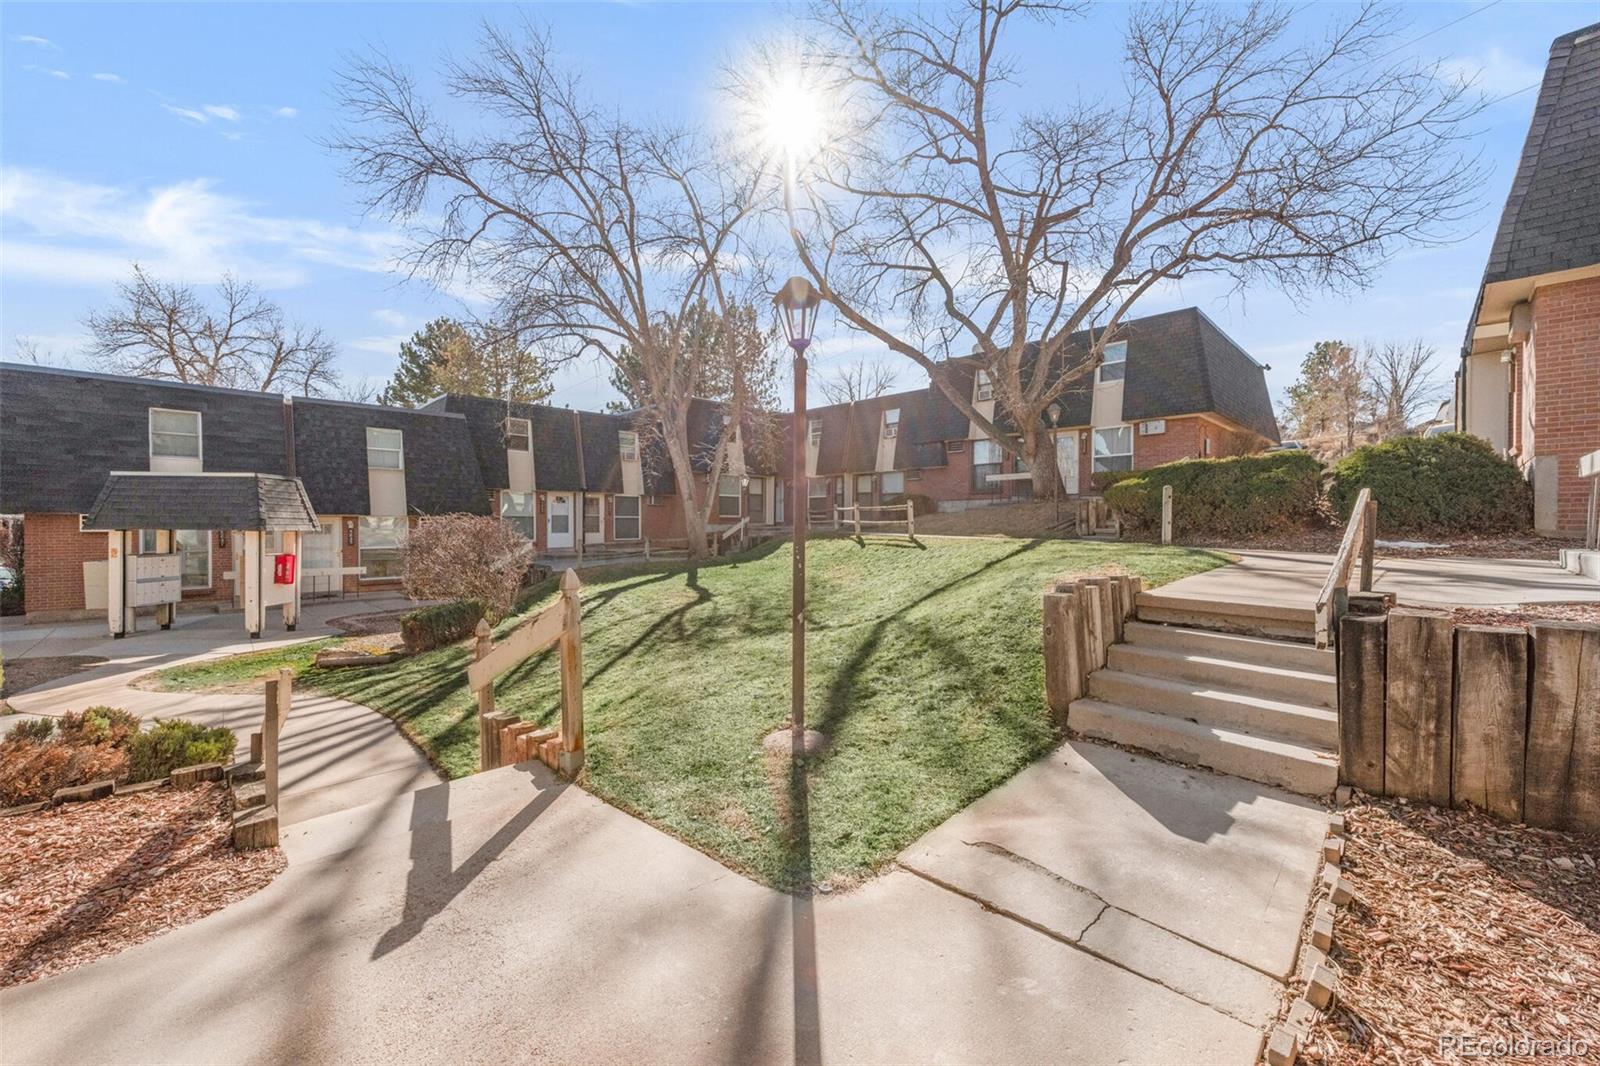 Report Image for 5815 S Pearl Street,Centennial, Colorado